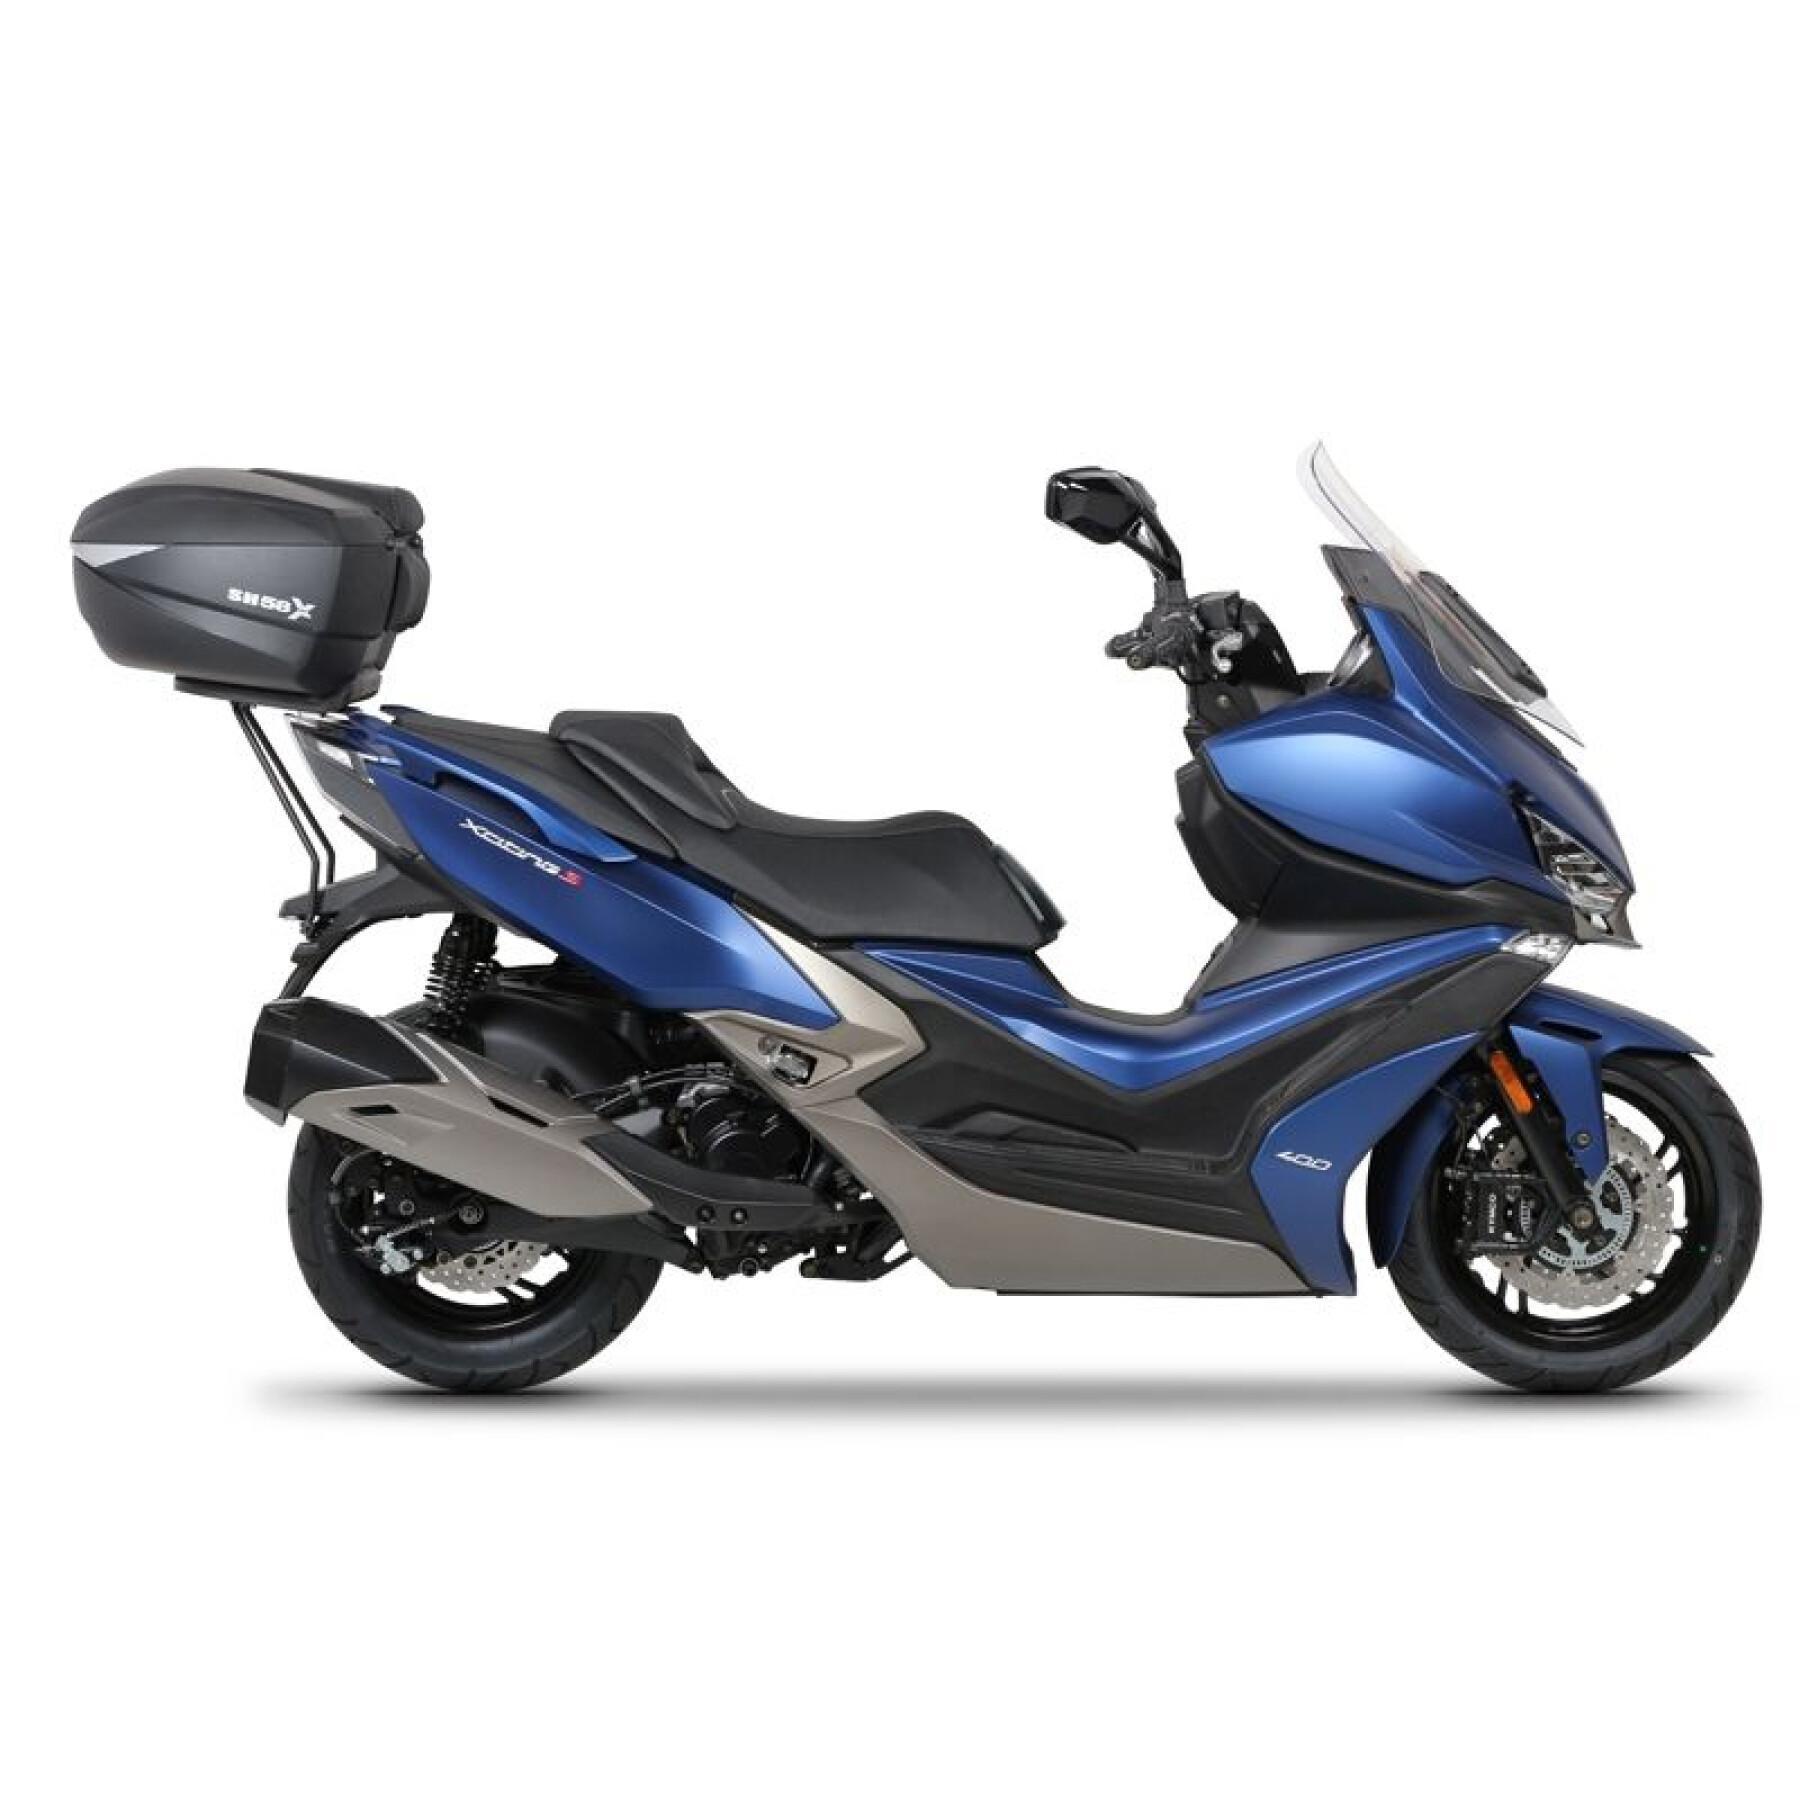 Scooter top case soporte Shad Kymco Xciting 400S (18 a 21)